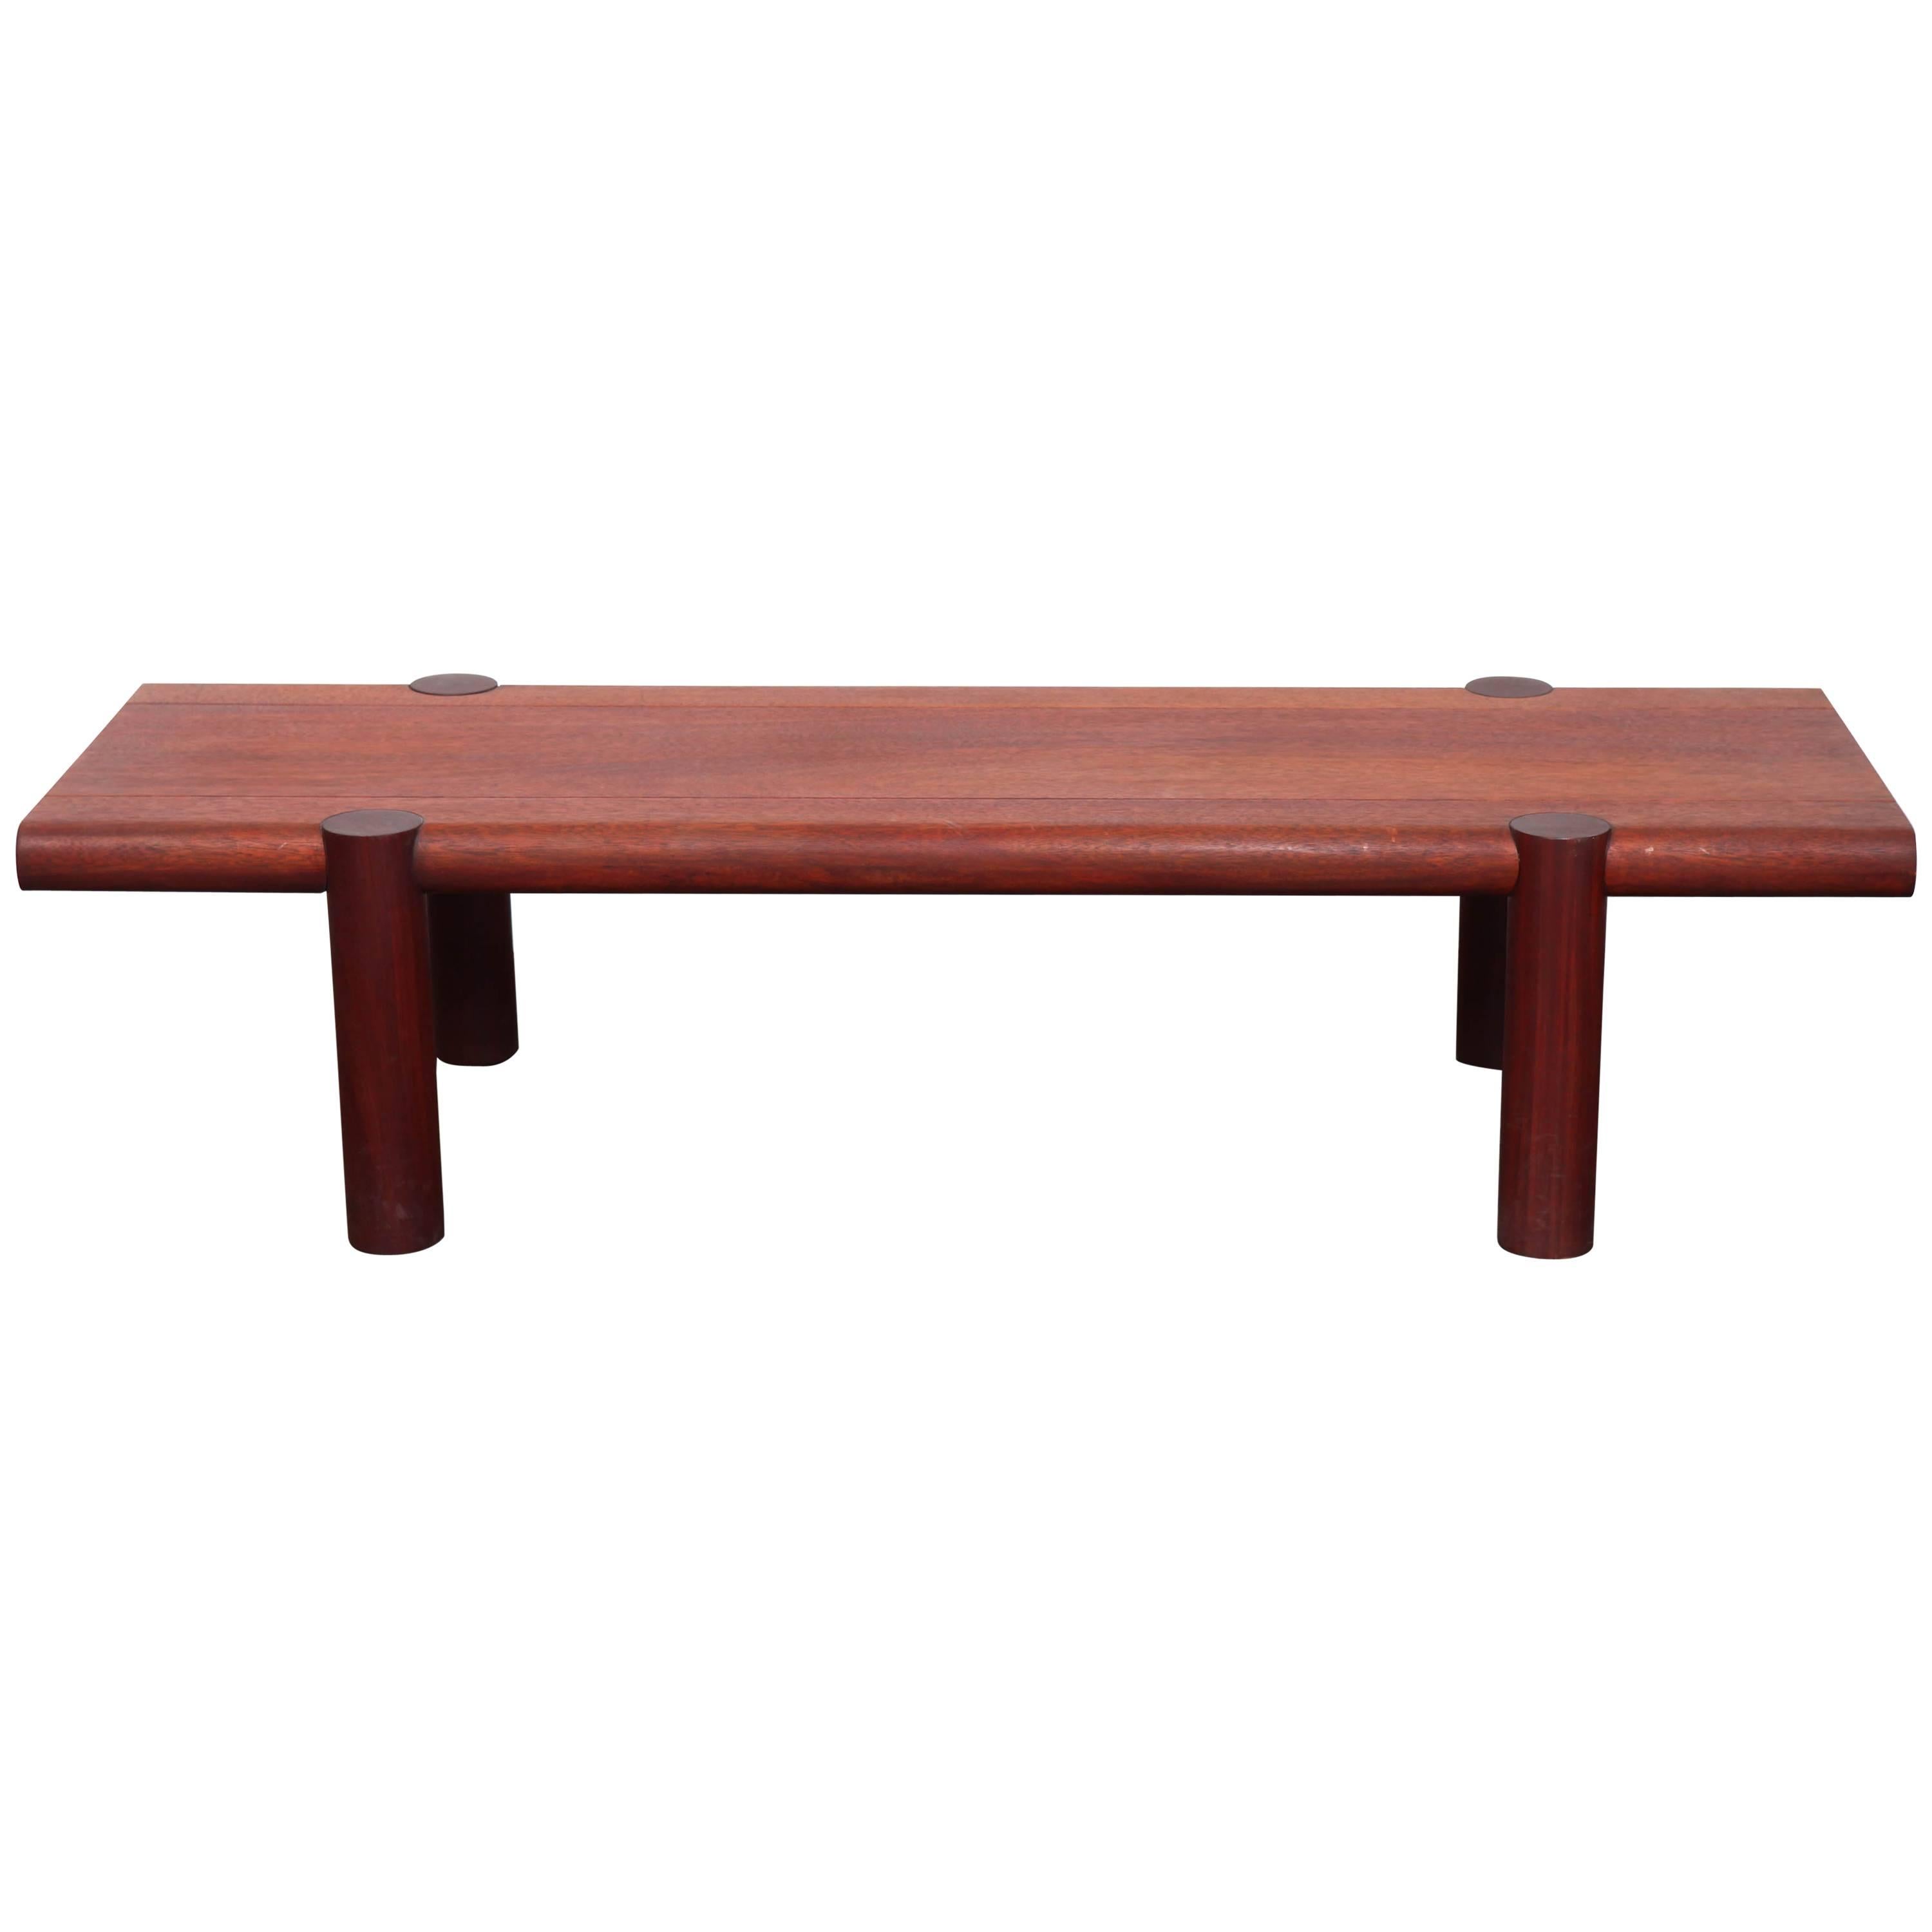 Long mahogany coffee table with cylindrical legs designed by celebrated midcentury Californian designer Sherrill Broudy. Made from solid mahogany with an oil finish, it was purchased from the designer's own home. Sherrill Broudy was one of the